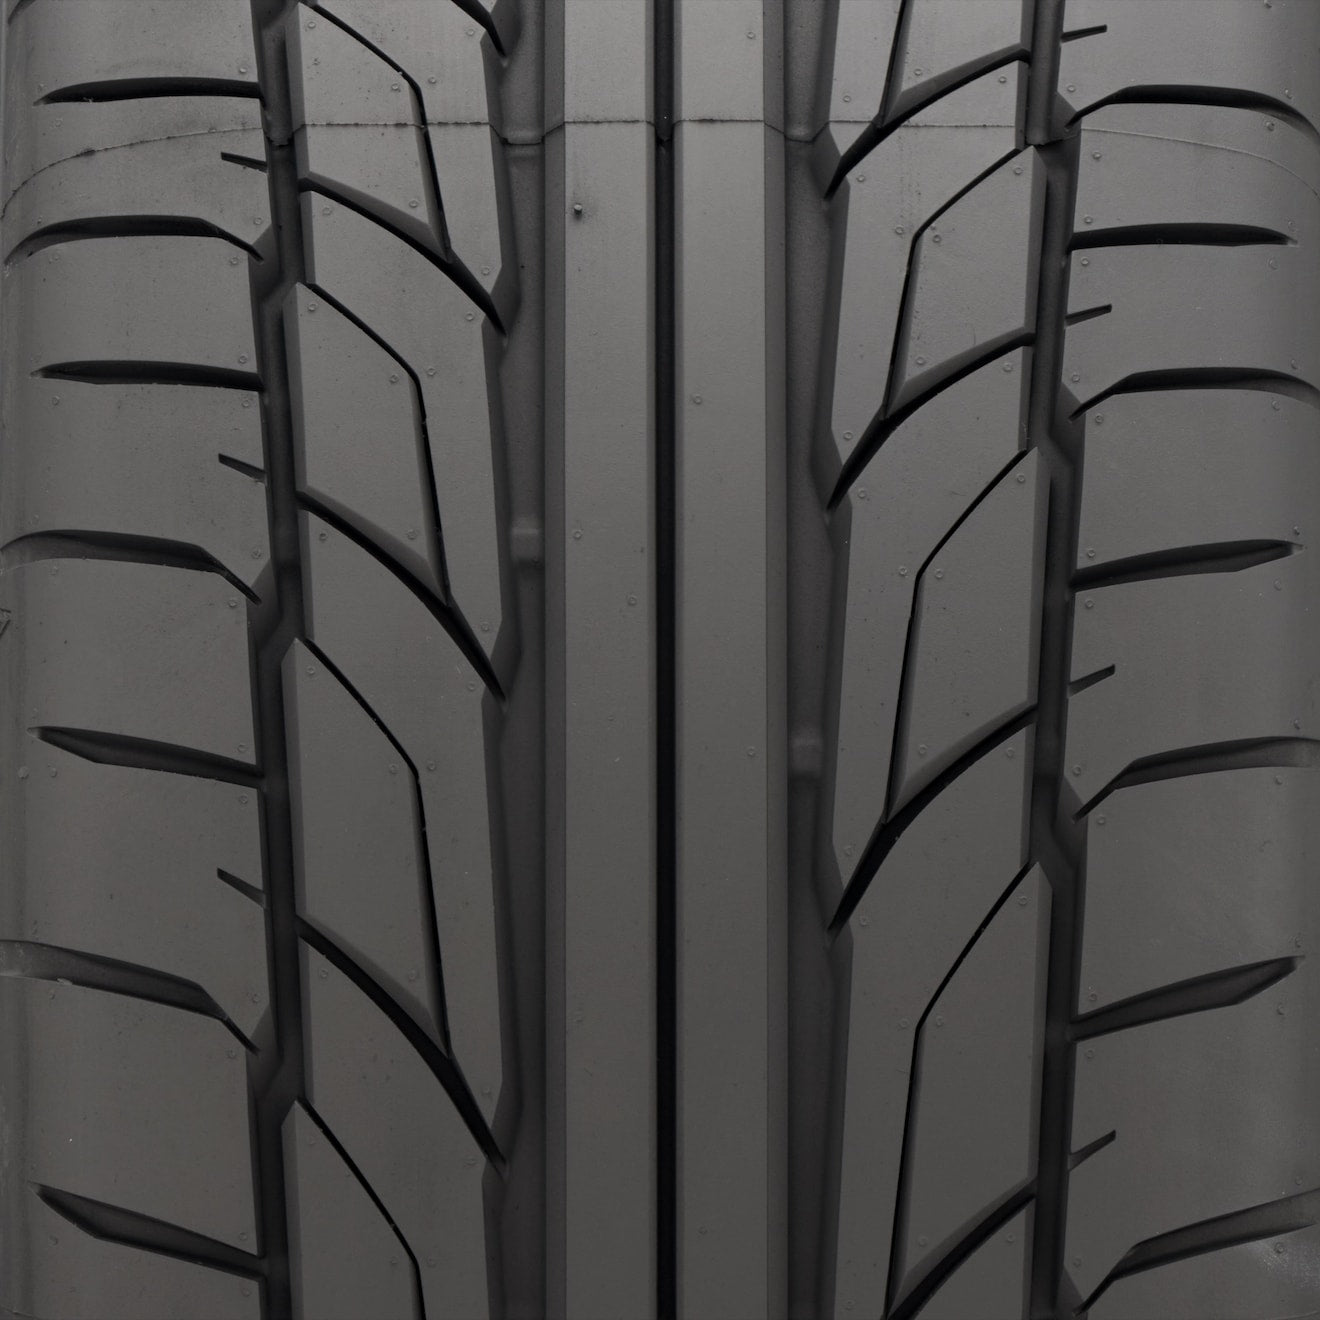 Nitto NT555 G2 Tire